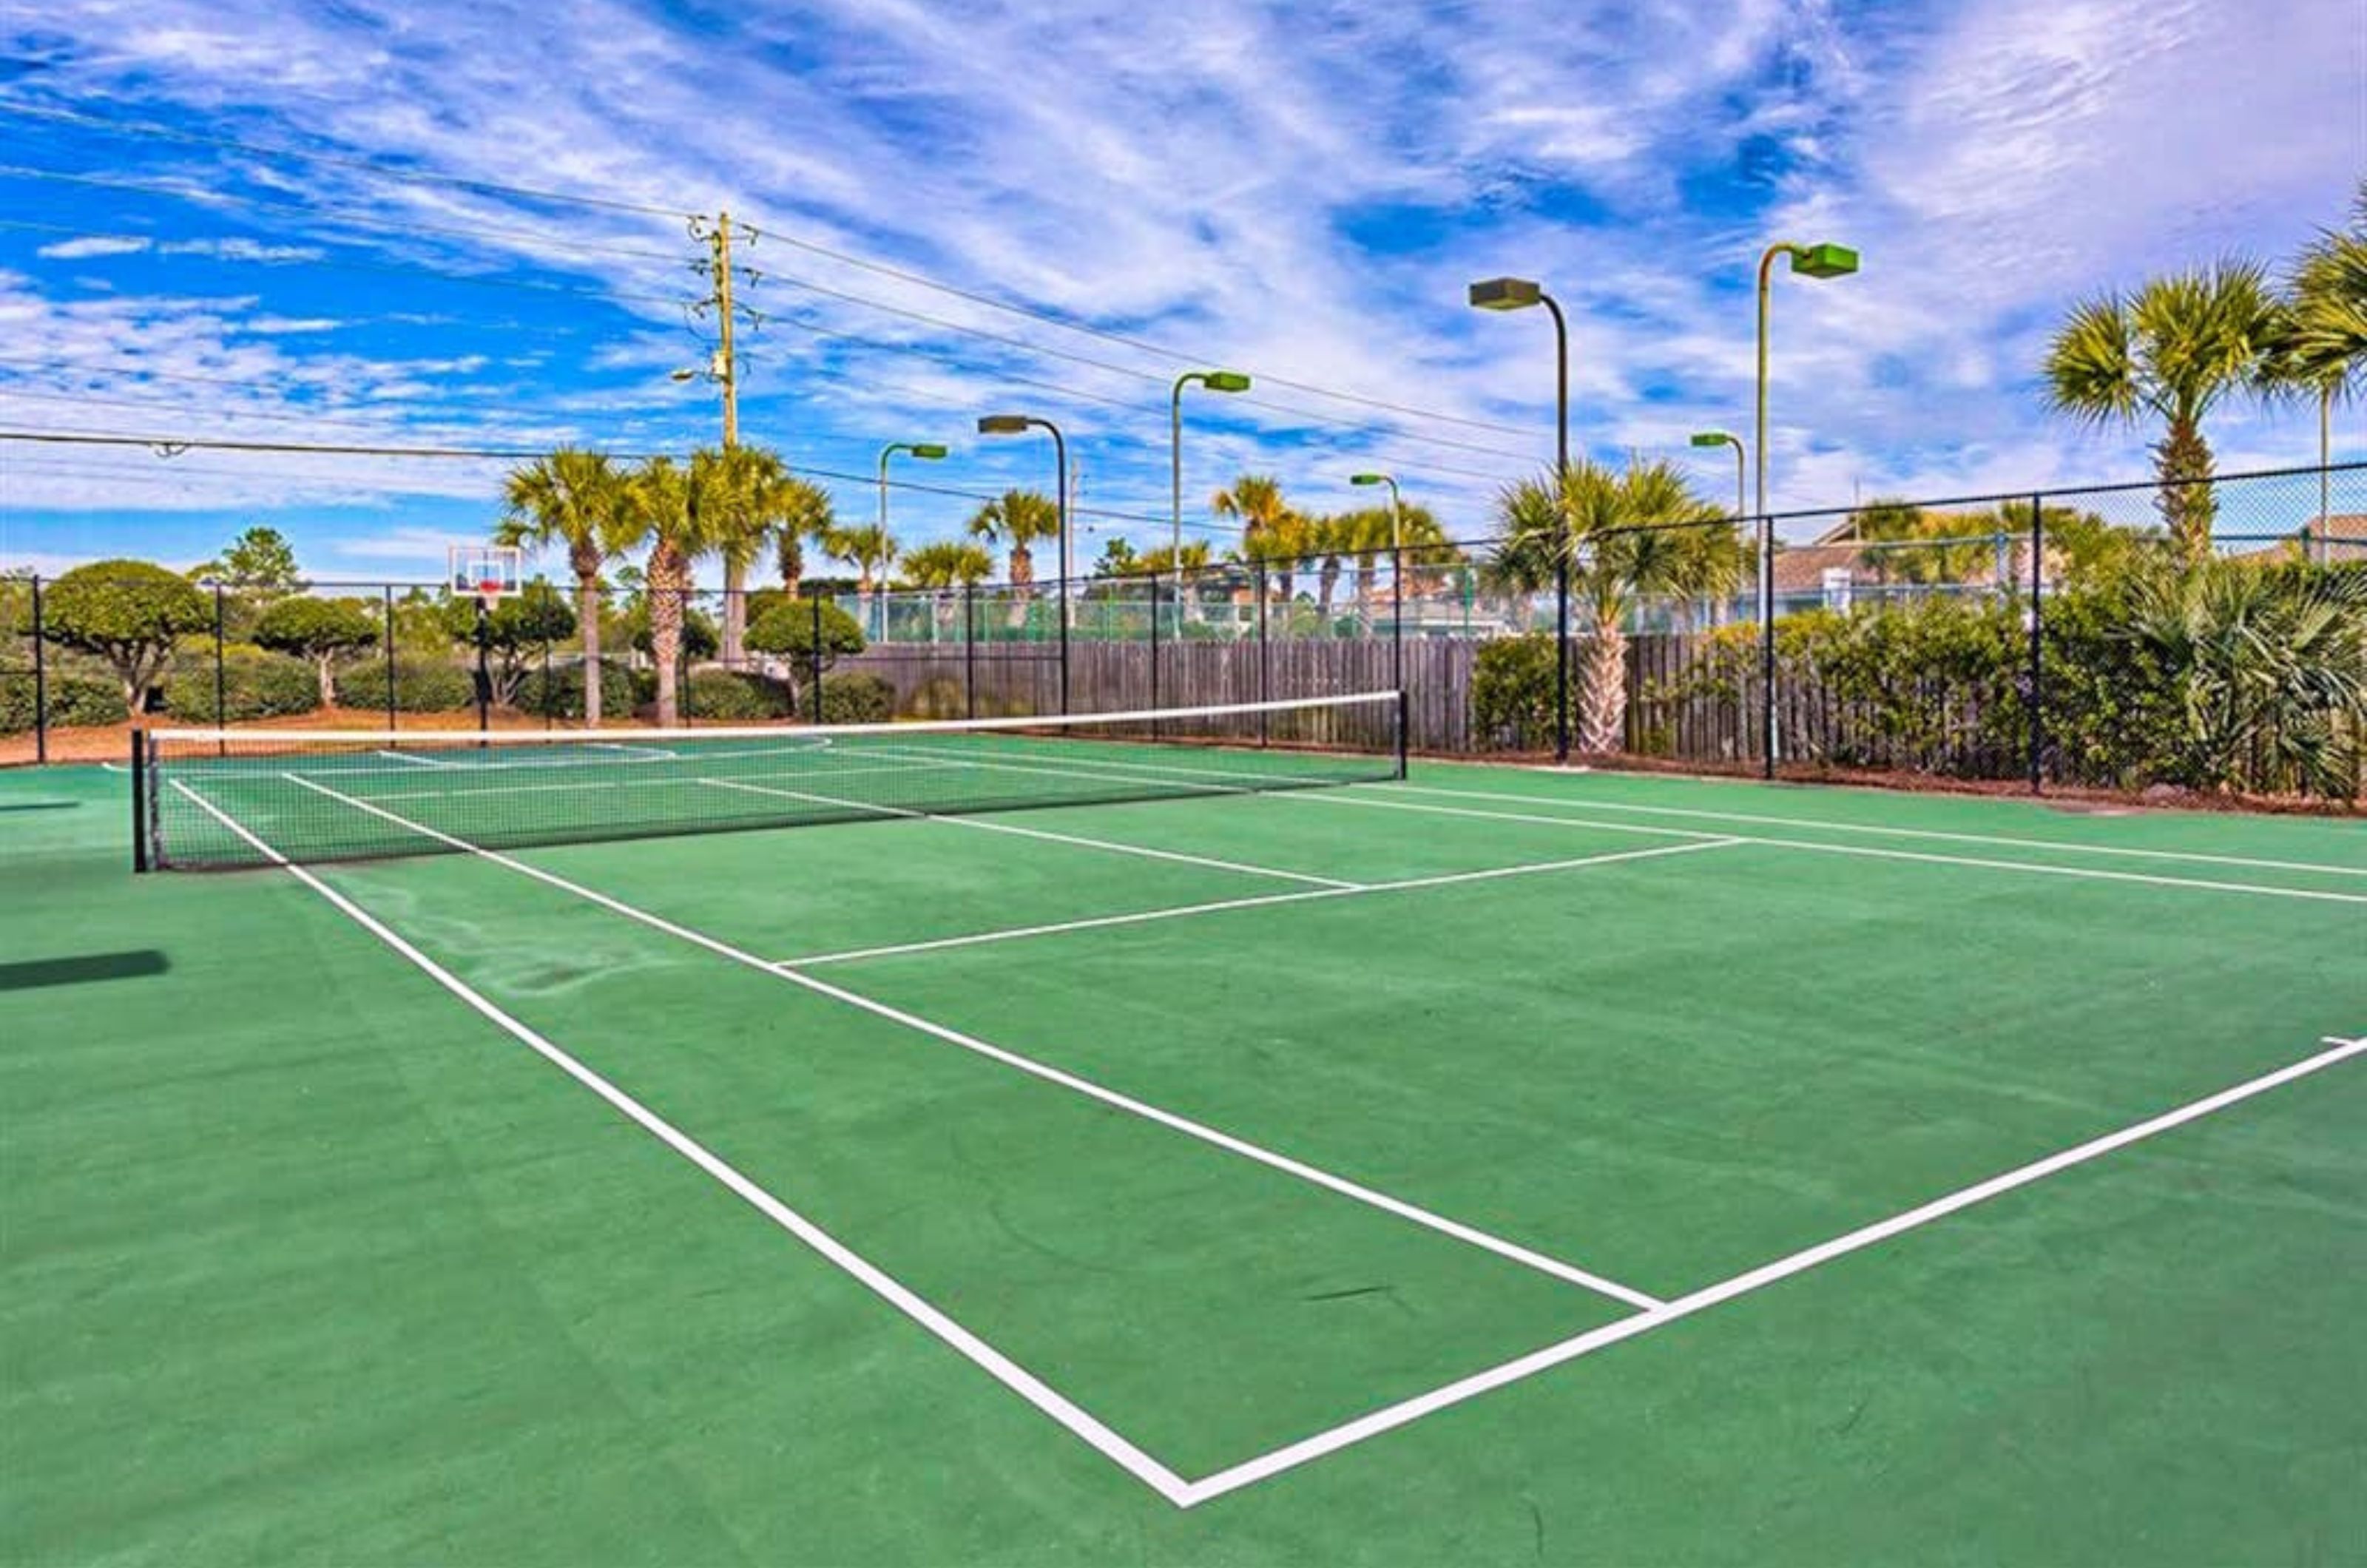 The outdoor tennis courts at Shoalwater Condominiums in Orange Beach Alabama